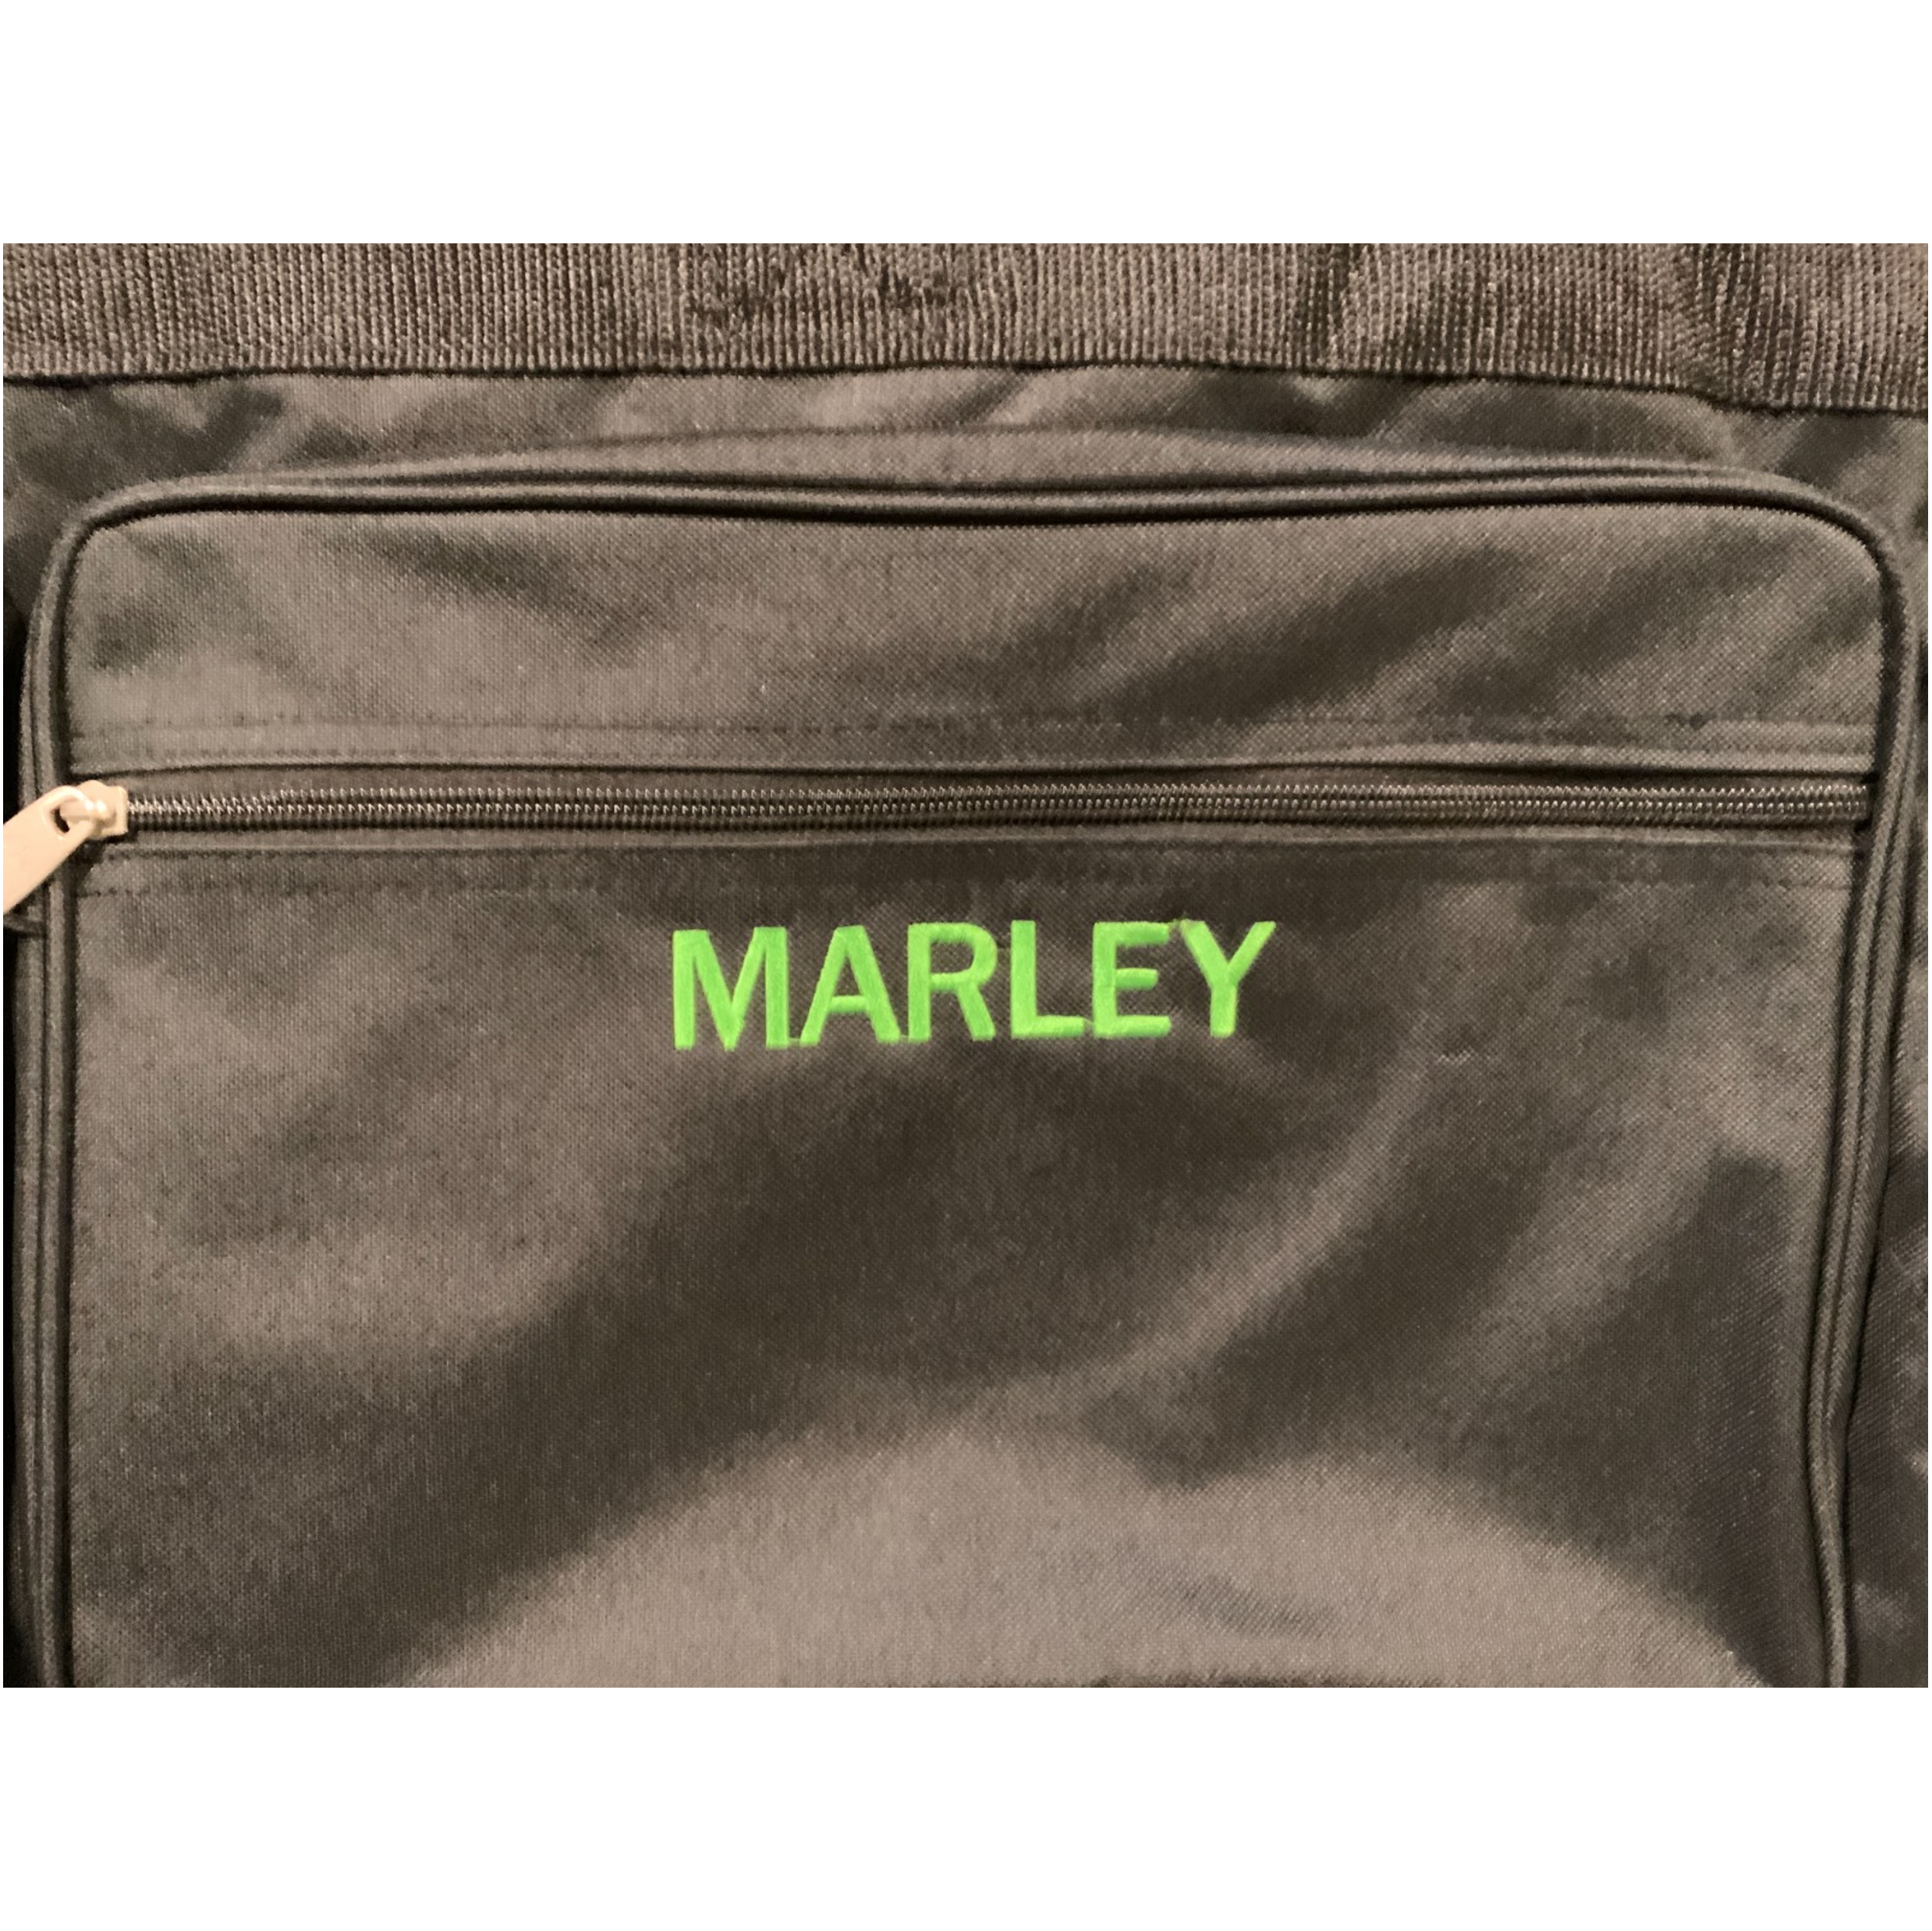 Extra Large Rolling Soft Trunk Duffel Bag 36 - Personalization Availa –  Pack for Camp